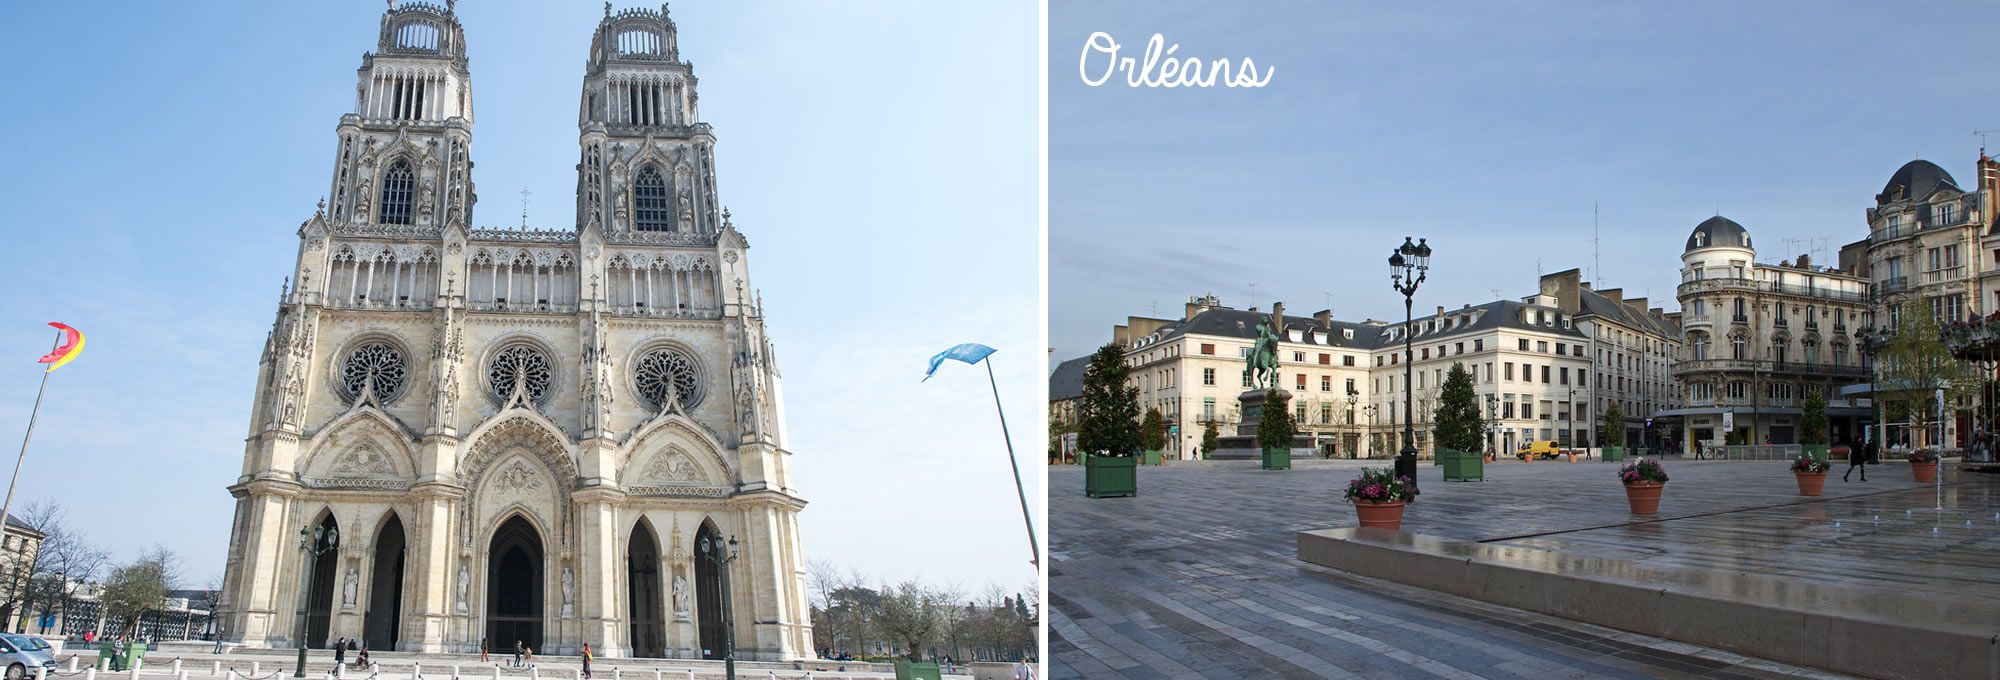 Tourism in Orleans